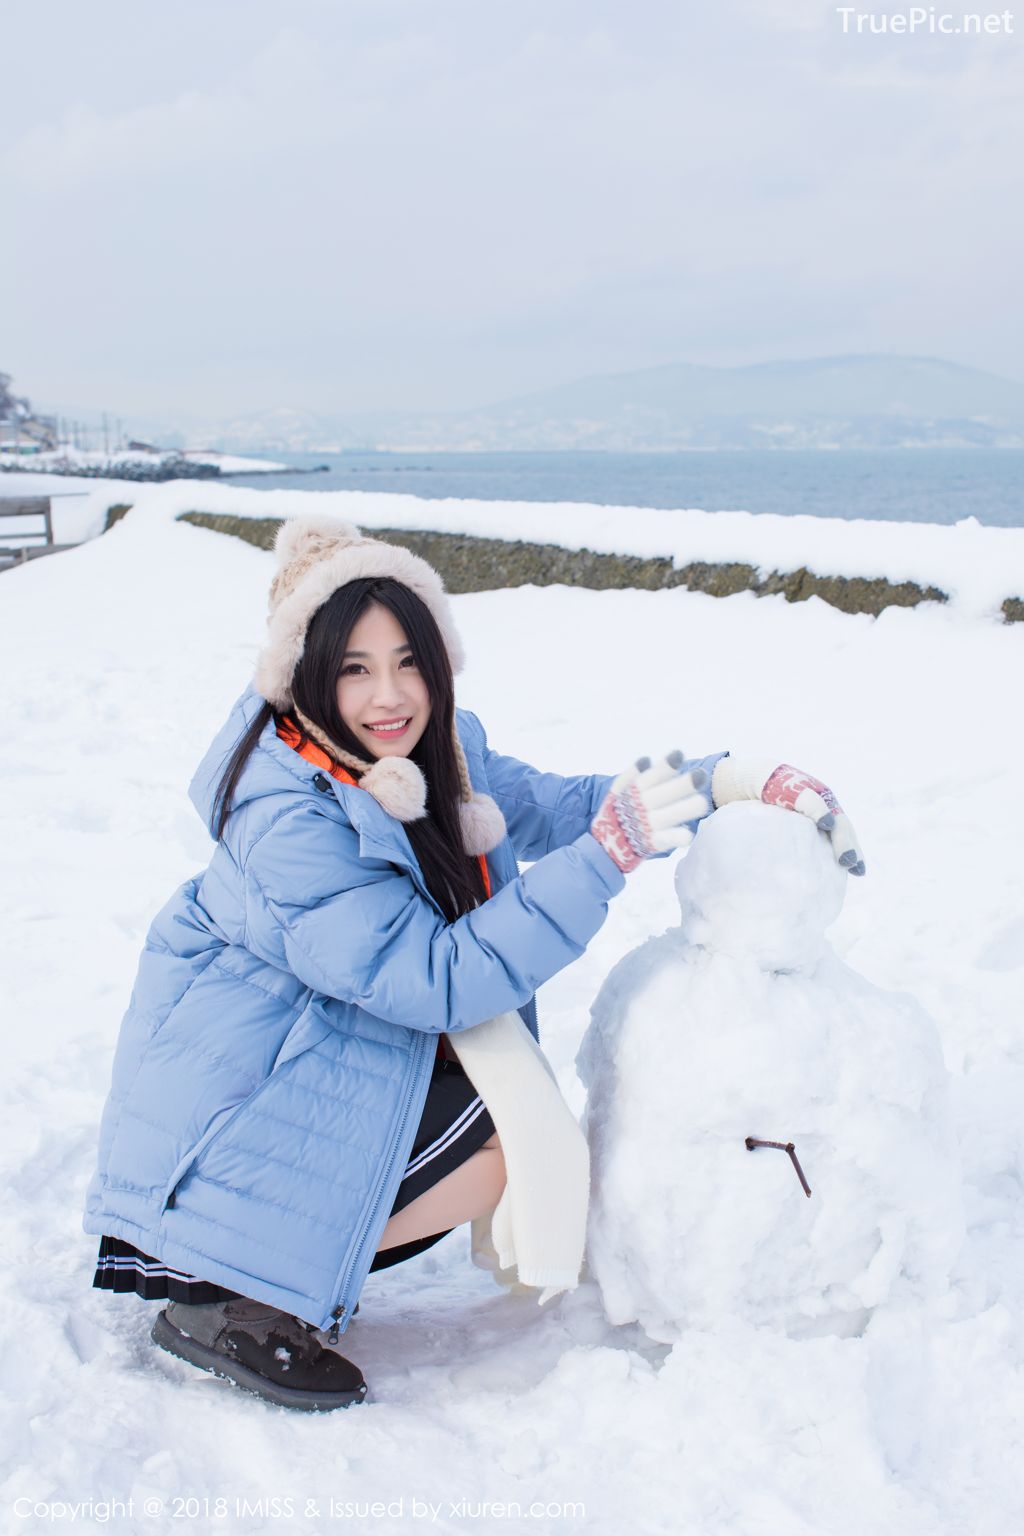 Image-IMISS-Vol.262-Sabrina model–Xu-Nuo-许诺-Sparkling-White-Snow-TruePic.net- Picture-17